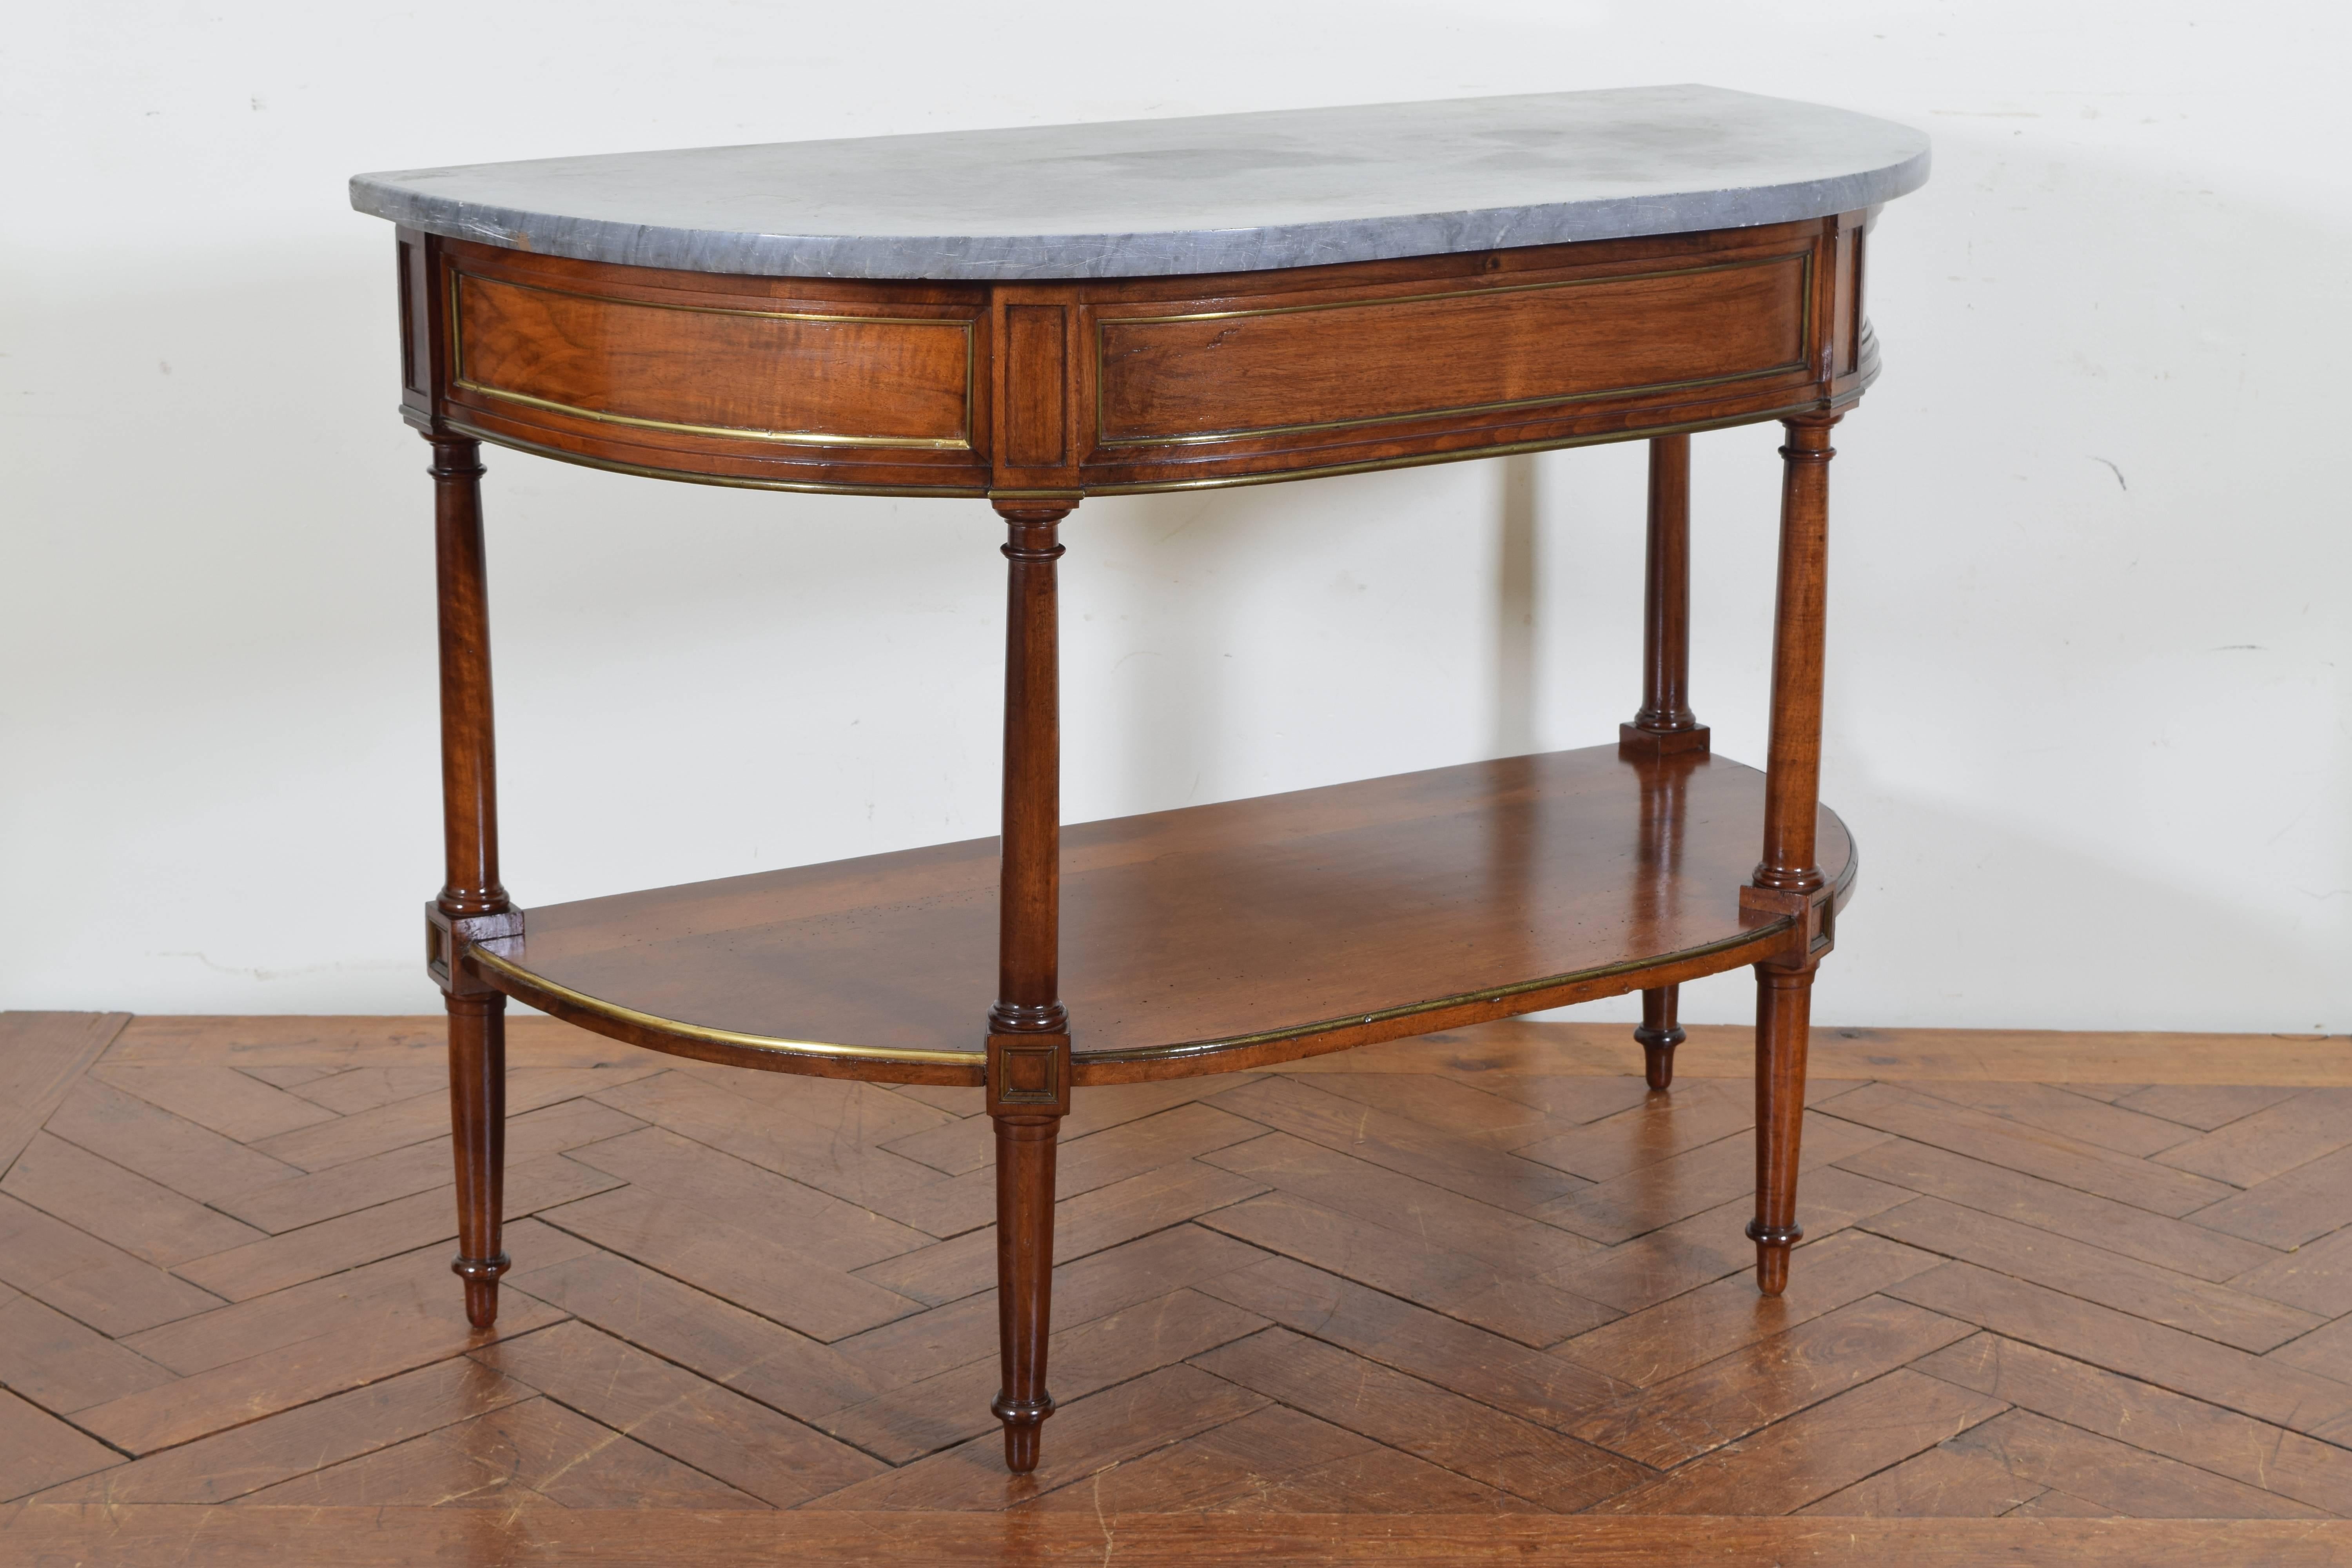 The grey marble-top of demilune form above a conforming frame, the panels of the upper section trimmed in brass, having turned legs and tapered feet, the lower section also trimmed in brass.